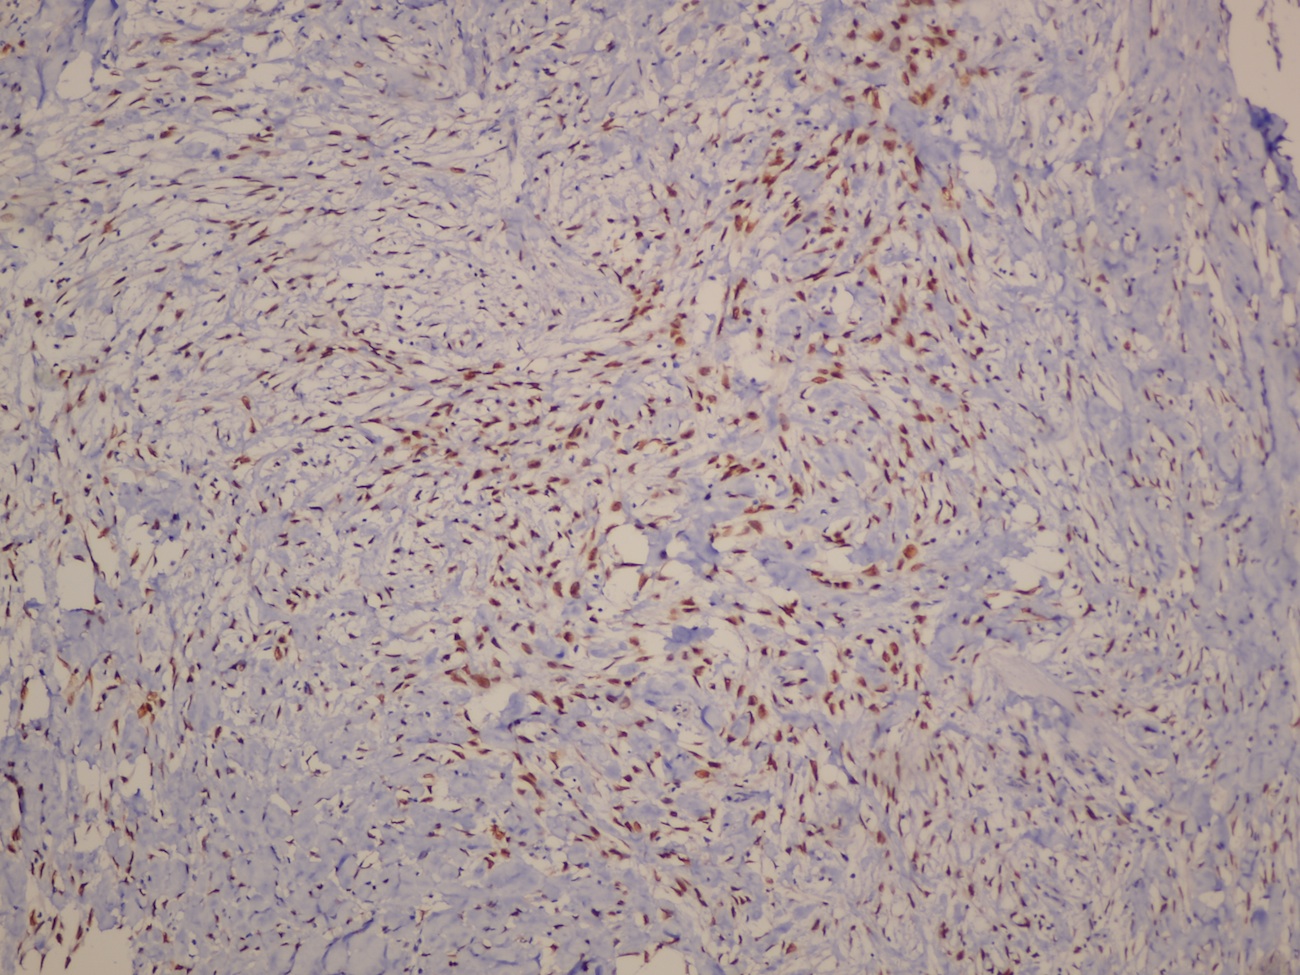 Tumor cells positive for p63 IHC